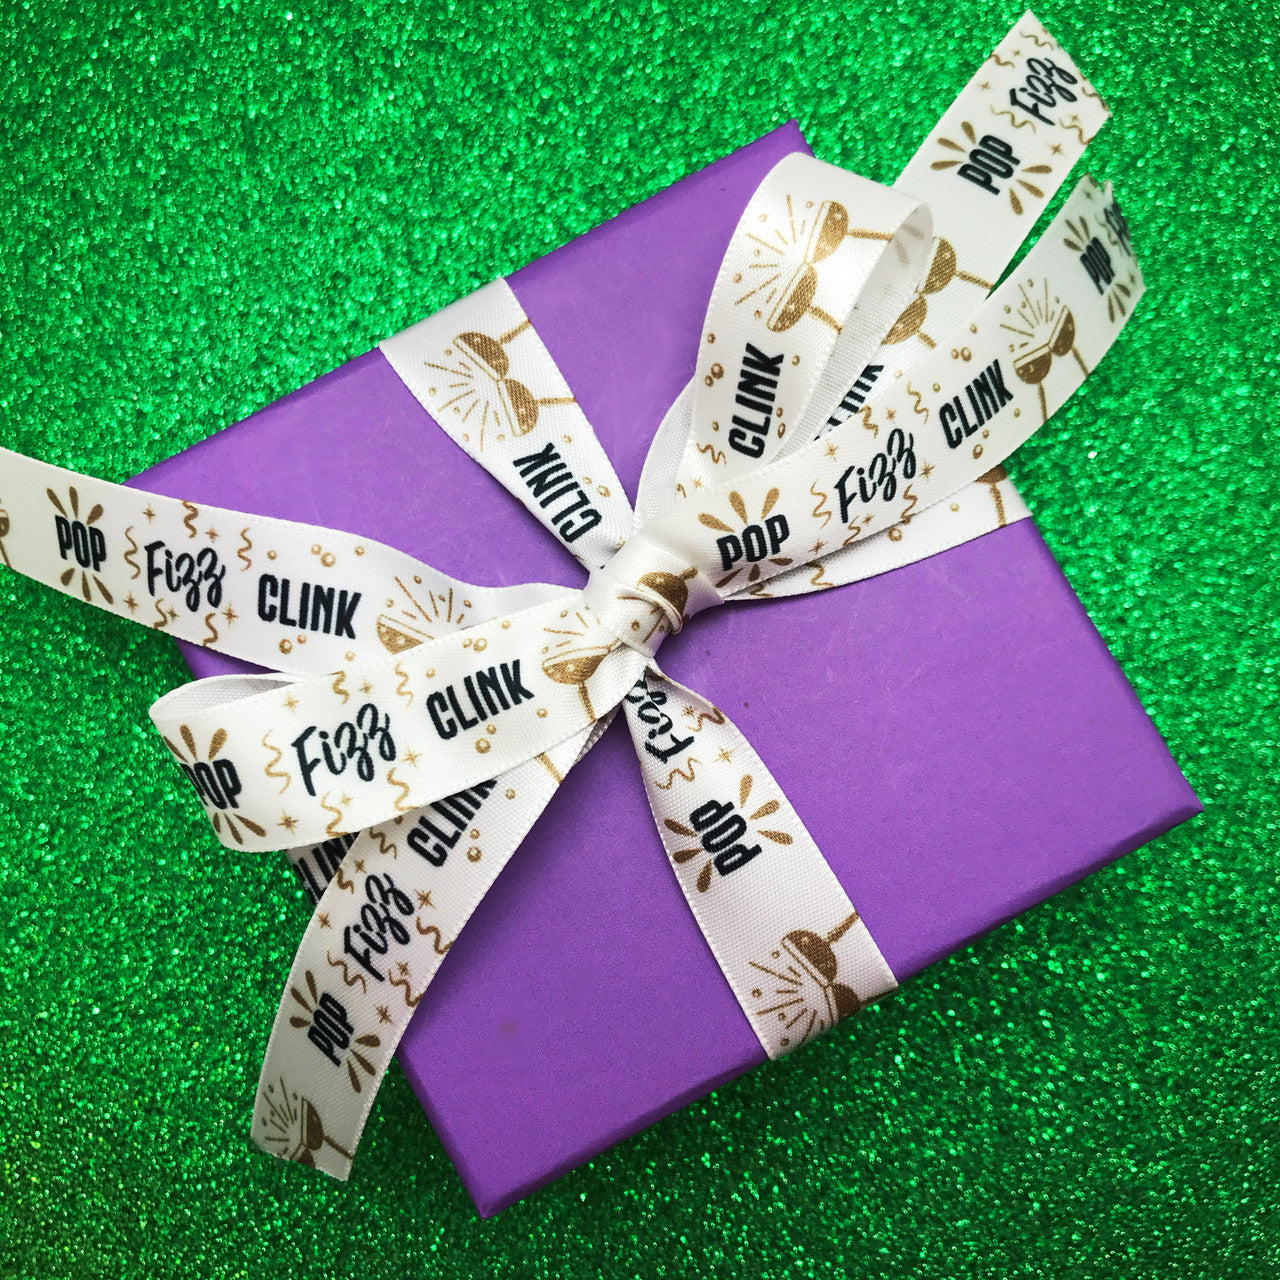 This little ribbon is the perfect addition to a special celebration gift!